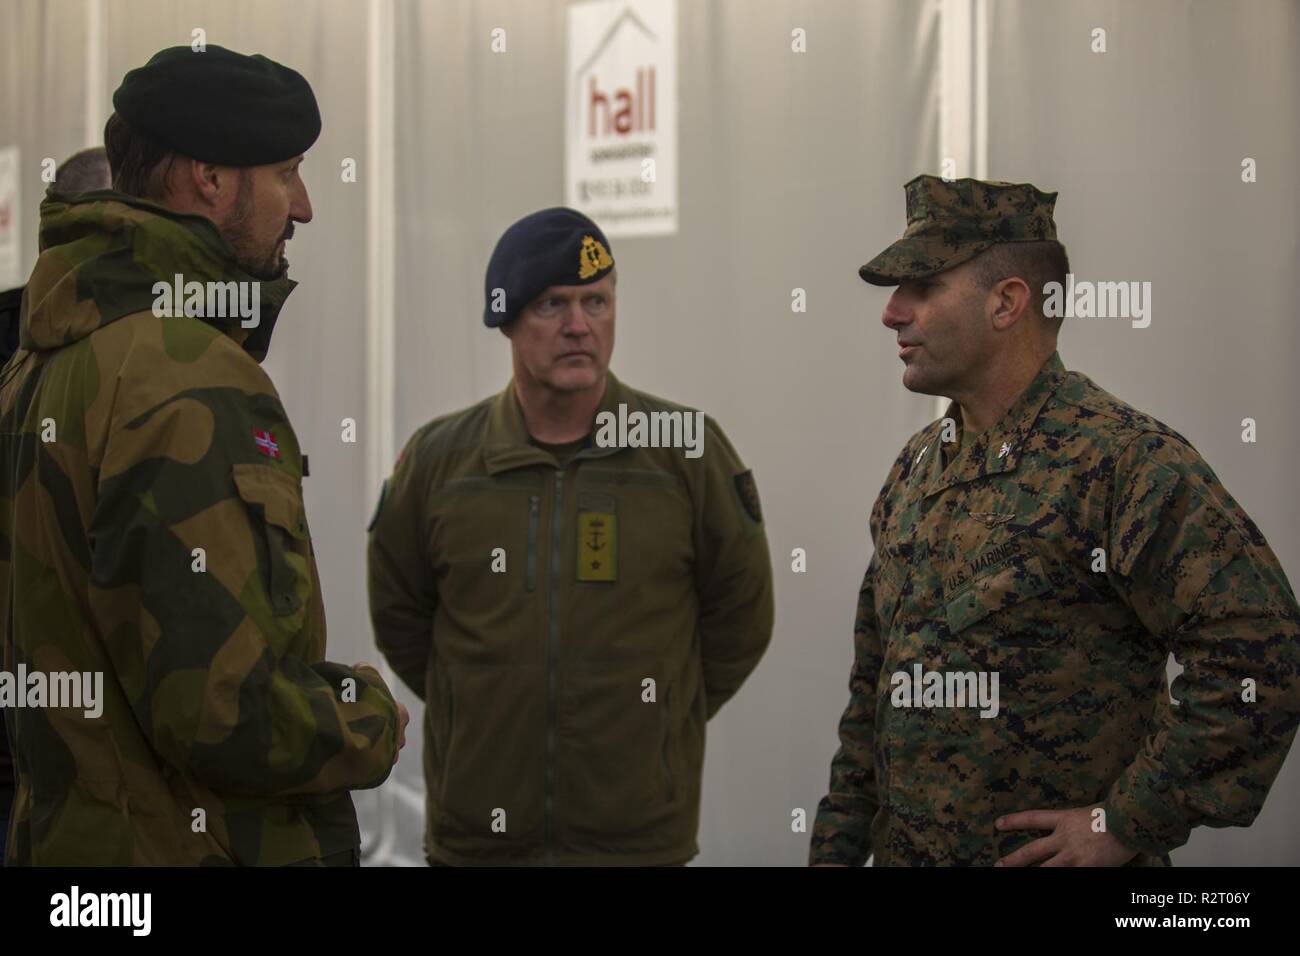 Crown Prince Haakon of Norway (left) speaks with U.S. Marine Corps Col. Frank N. Latt (rigtht), the assistant wing commander of 2nd Marine Aircraft Wing, while touring around the living quarters during Exercise Trident Juncture 2018 at Vaernes Air Station, Norway, Nov. 2018. Trident Juncture 18 enhances the U.S. and NATO Allies’ and partners’ abilities to work together collectively to conduct military operations under challenging conditions. Stock Photo